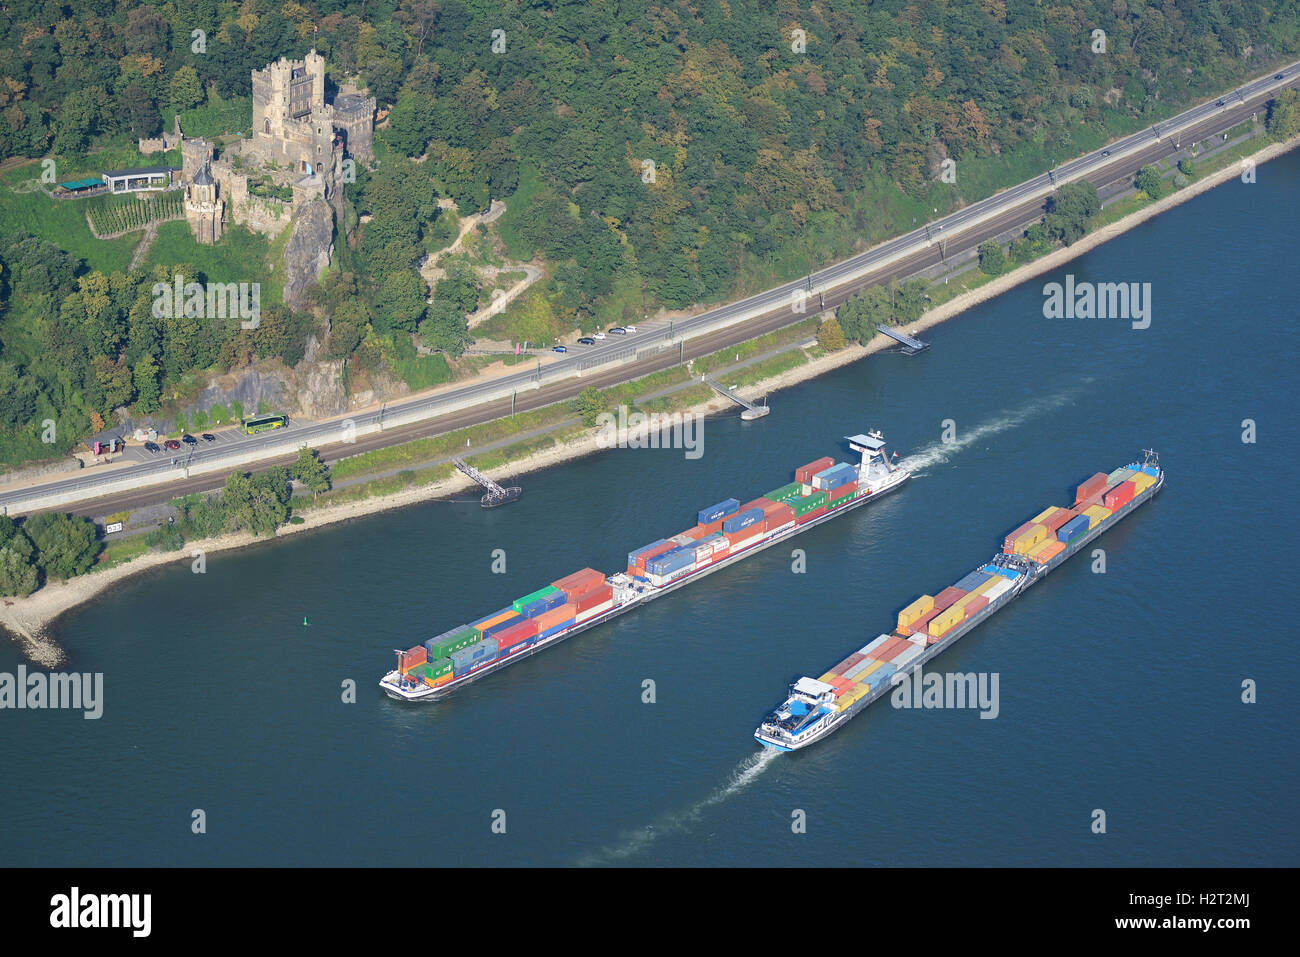 AERIAL VIEW. Container carriers on the heavily traveled Rhine River. Rheinstein Castle, Trechtingshausen, Rhineland-Palatinate, Germany. Stock Photo